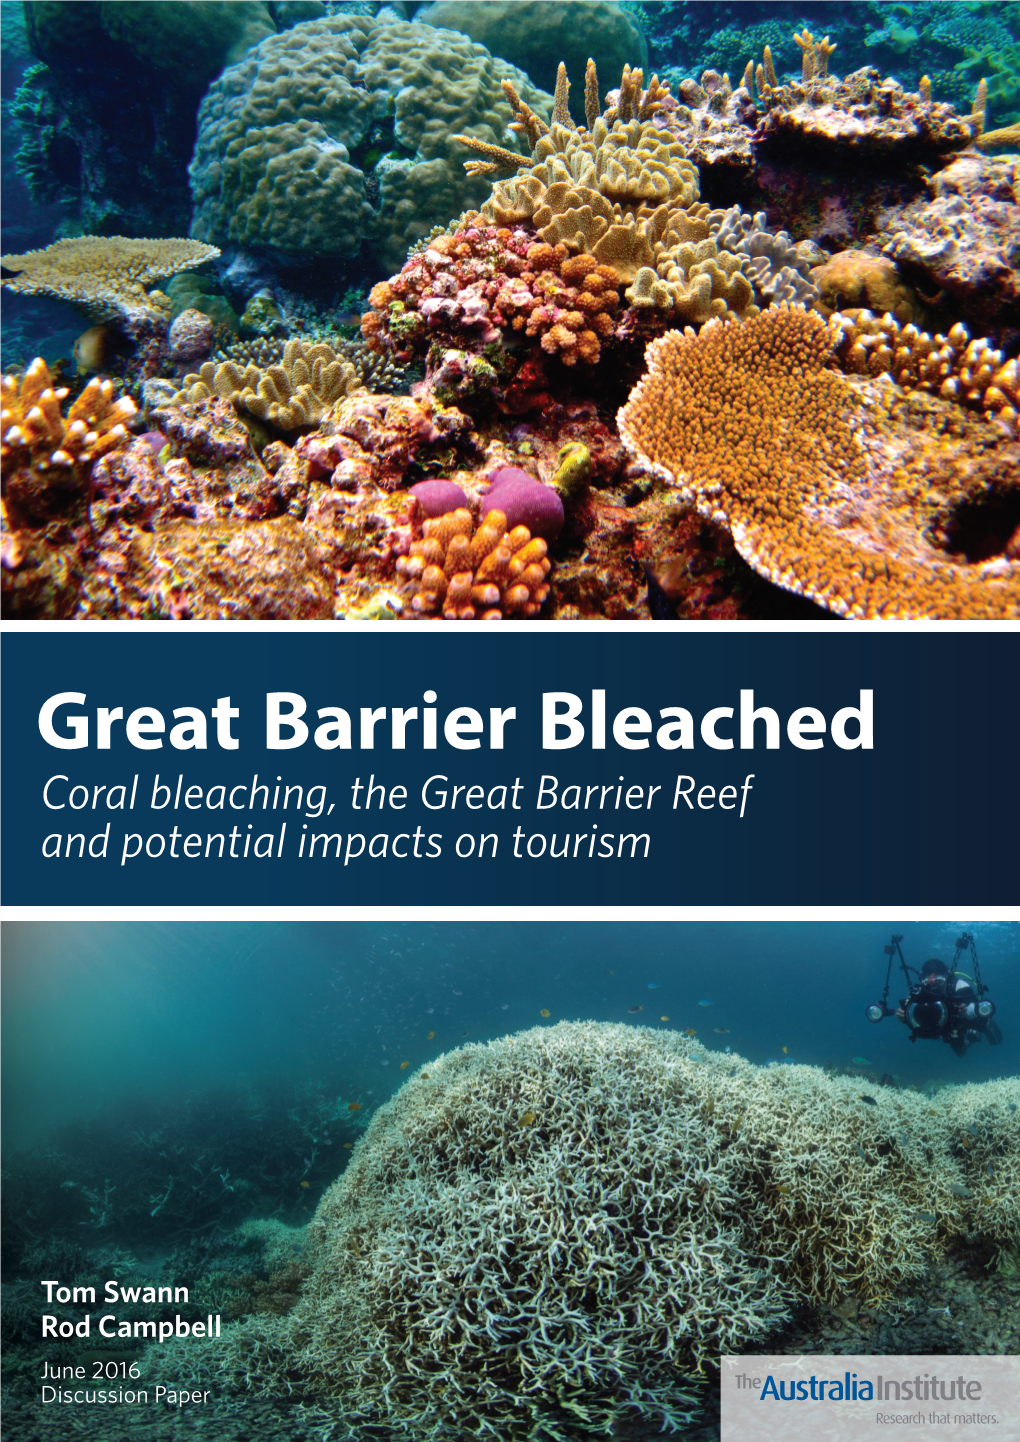 Coral Bleaching, the Great Barrier Reef and Potential Impacts on Tourism